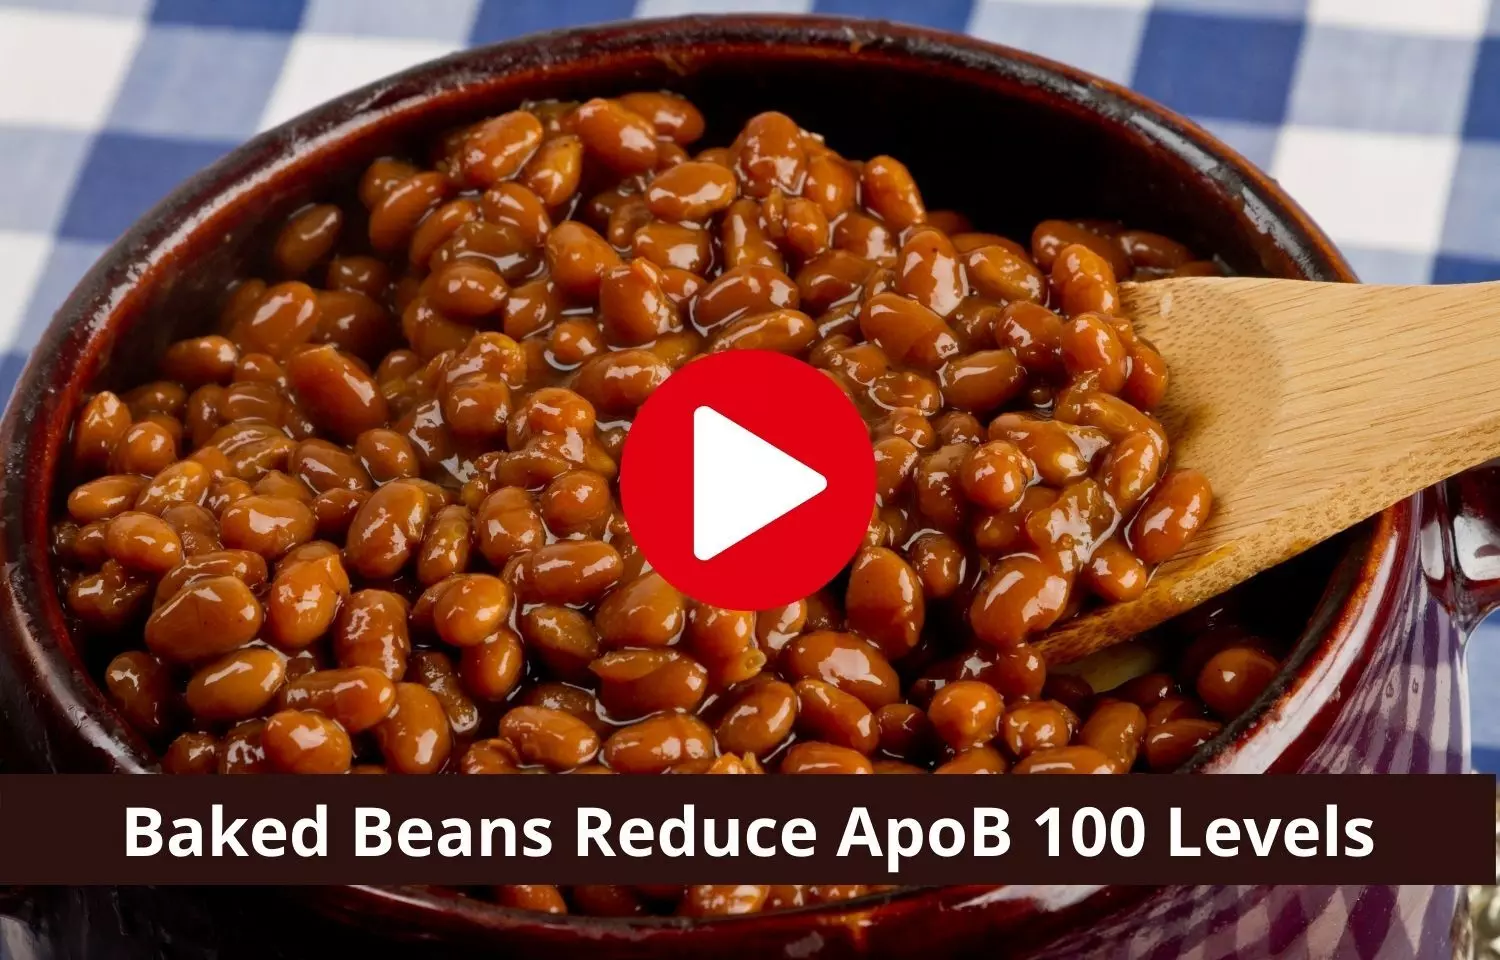 ApoB 100 Levels reduction observed with baked beans consumption